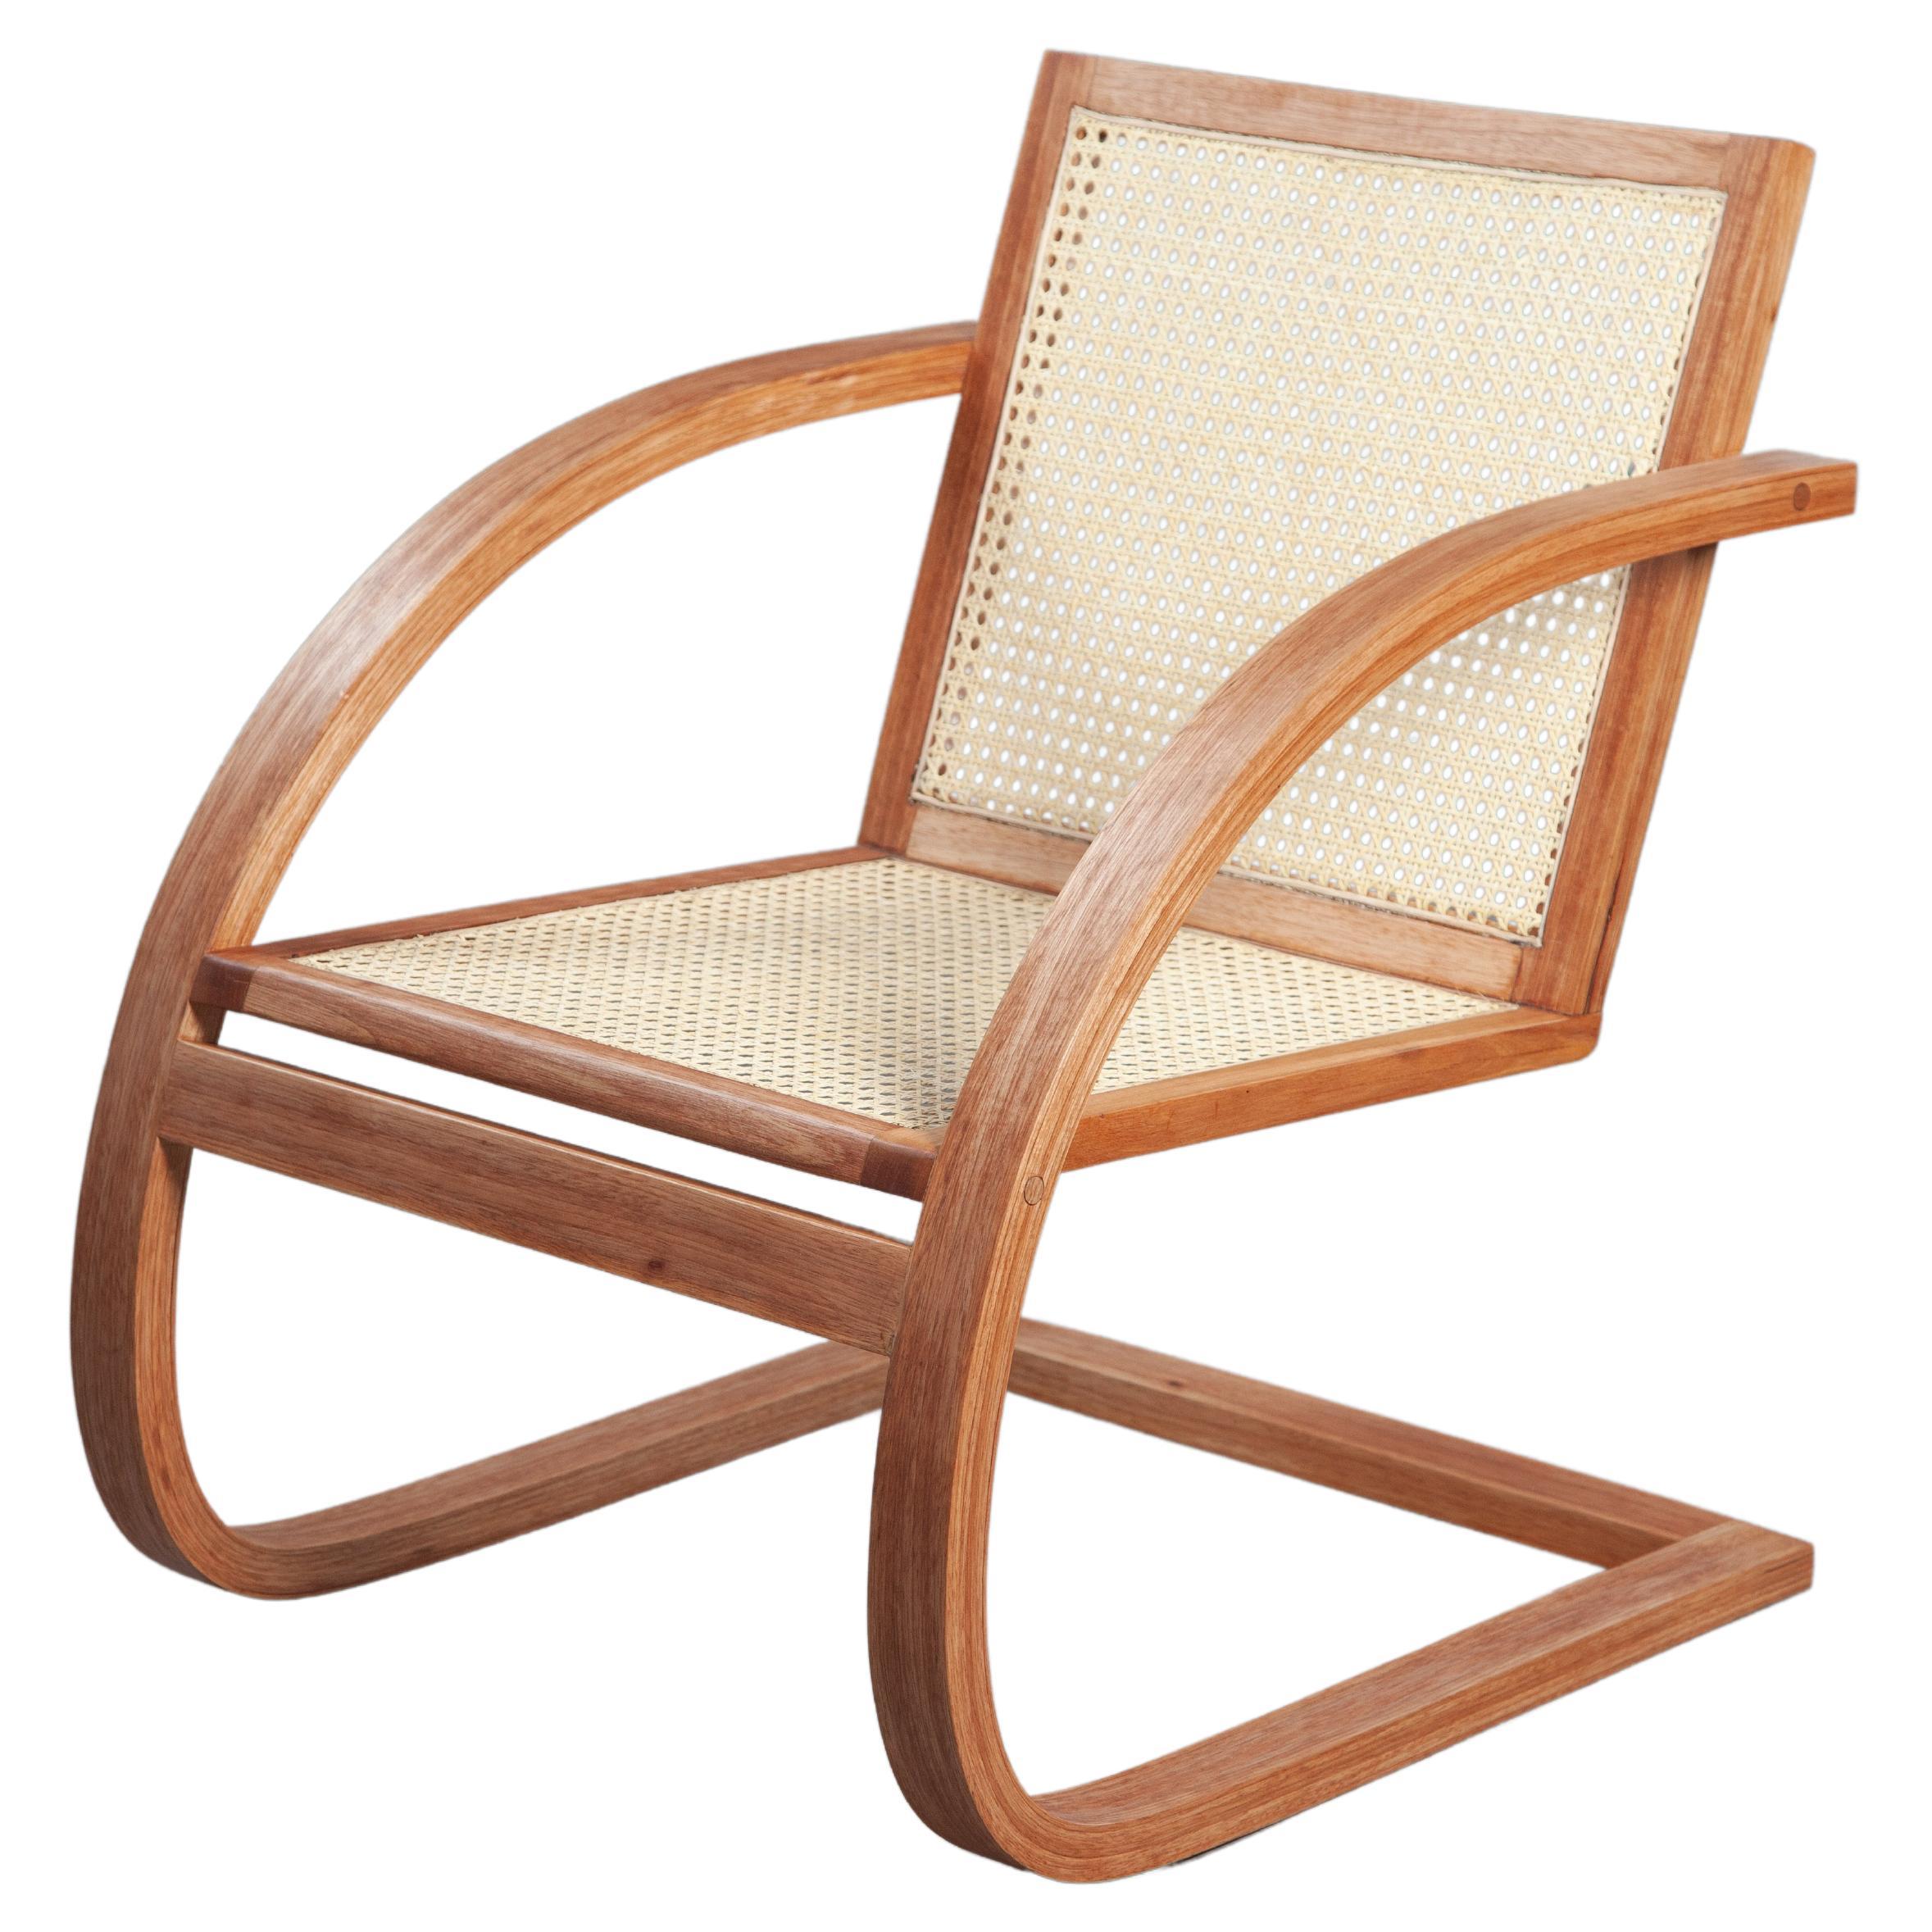 Mima Lounge Chair. Handcrafted from solid wood